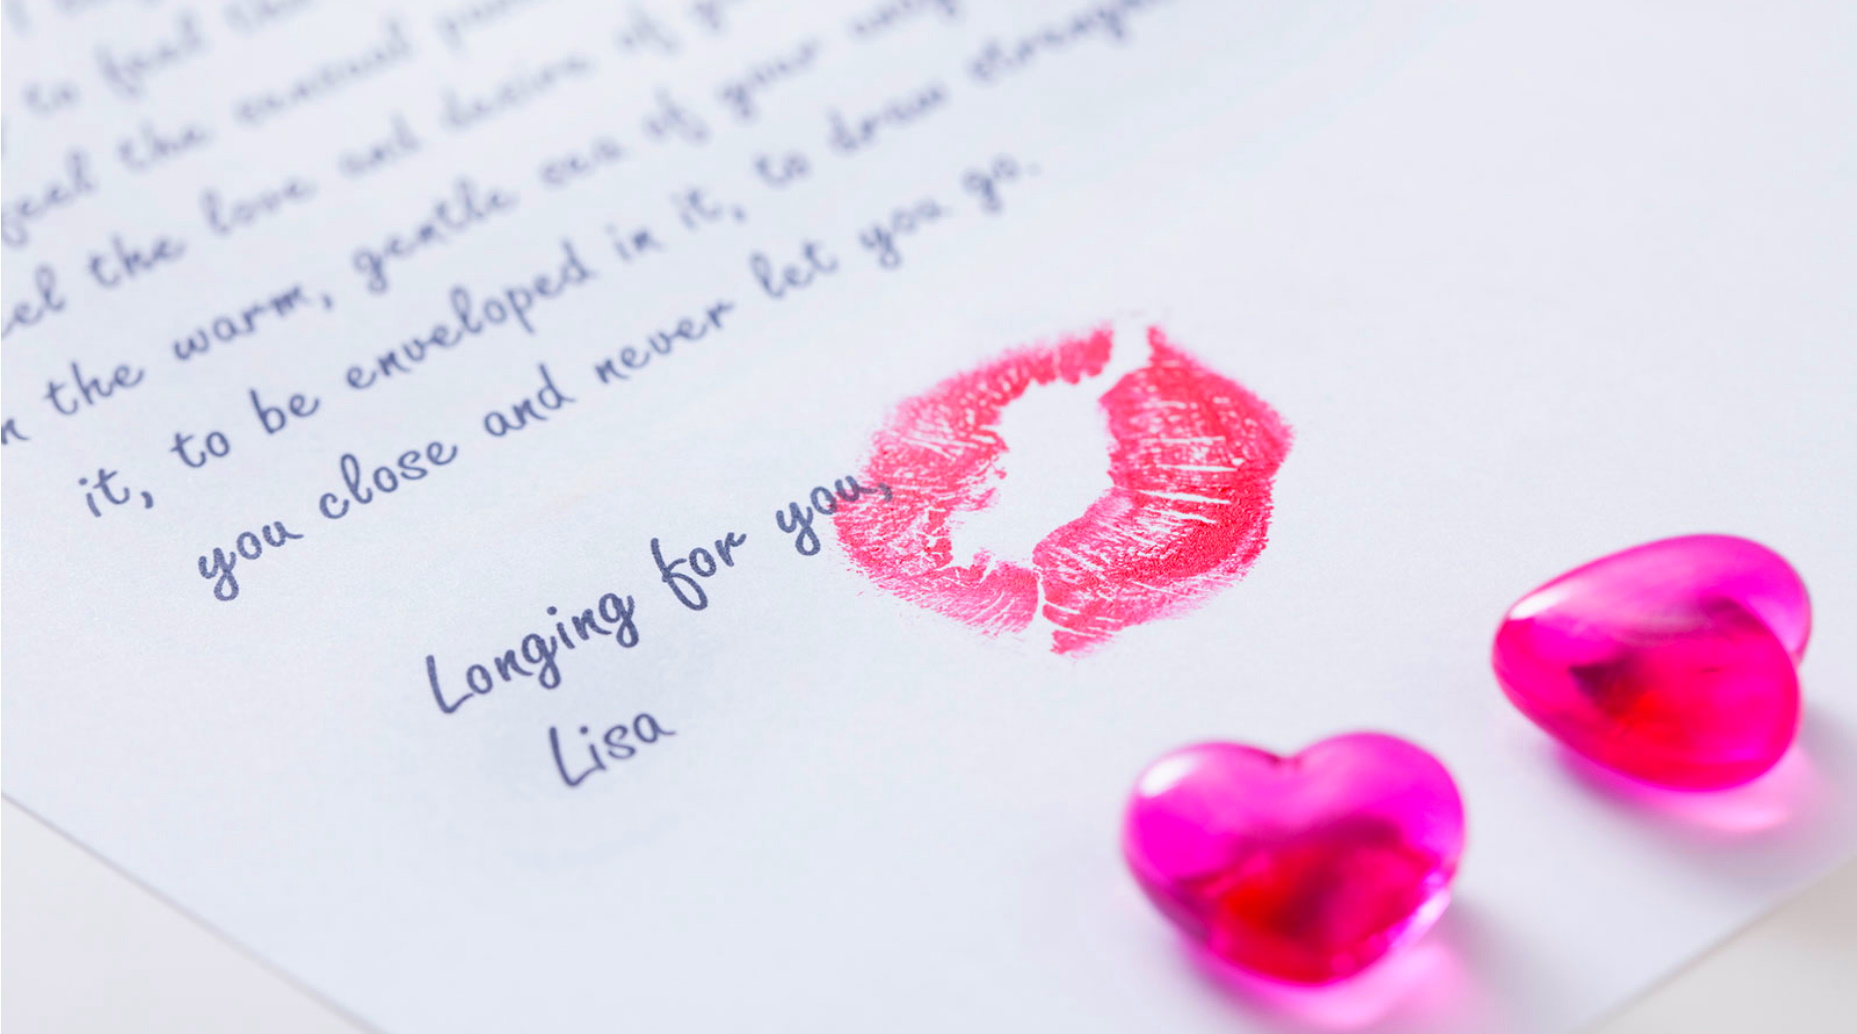 Love Letter Poems Top Selection of Beautiful Love Letters. 